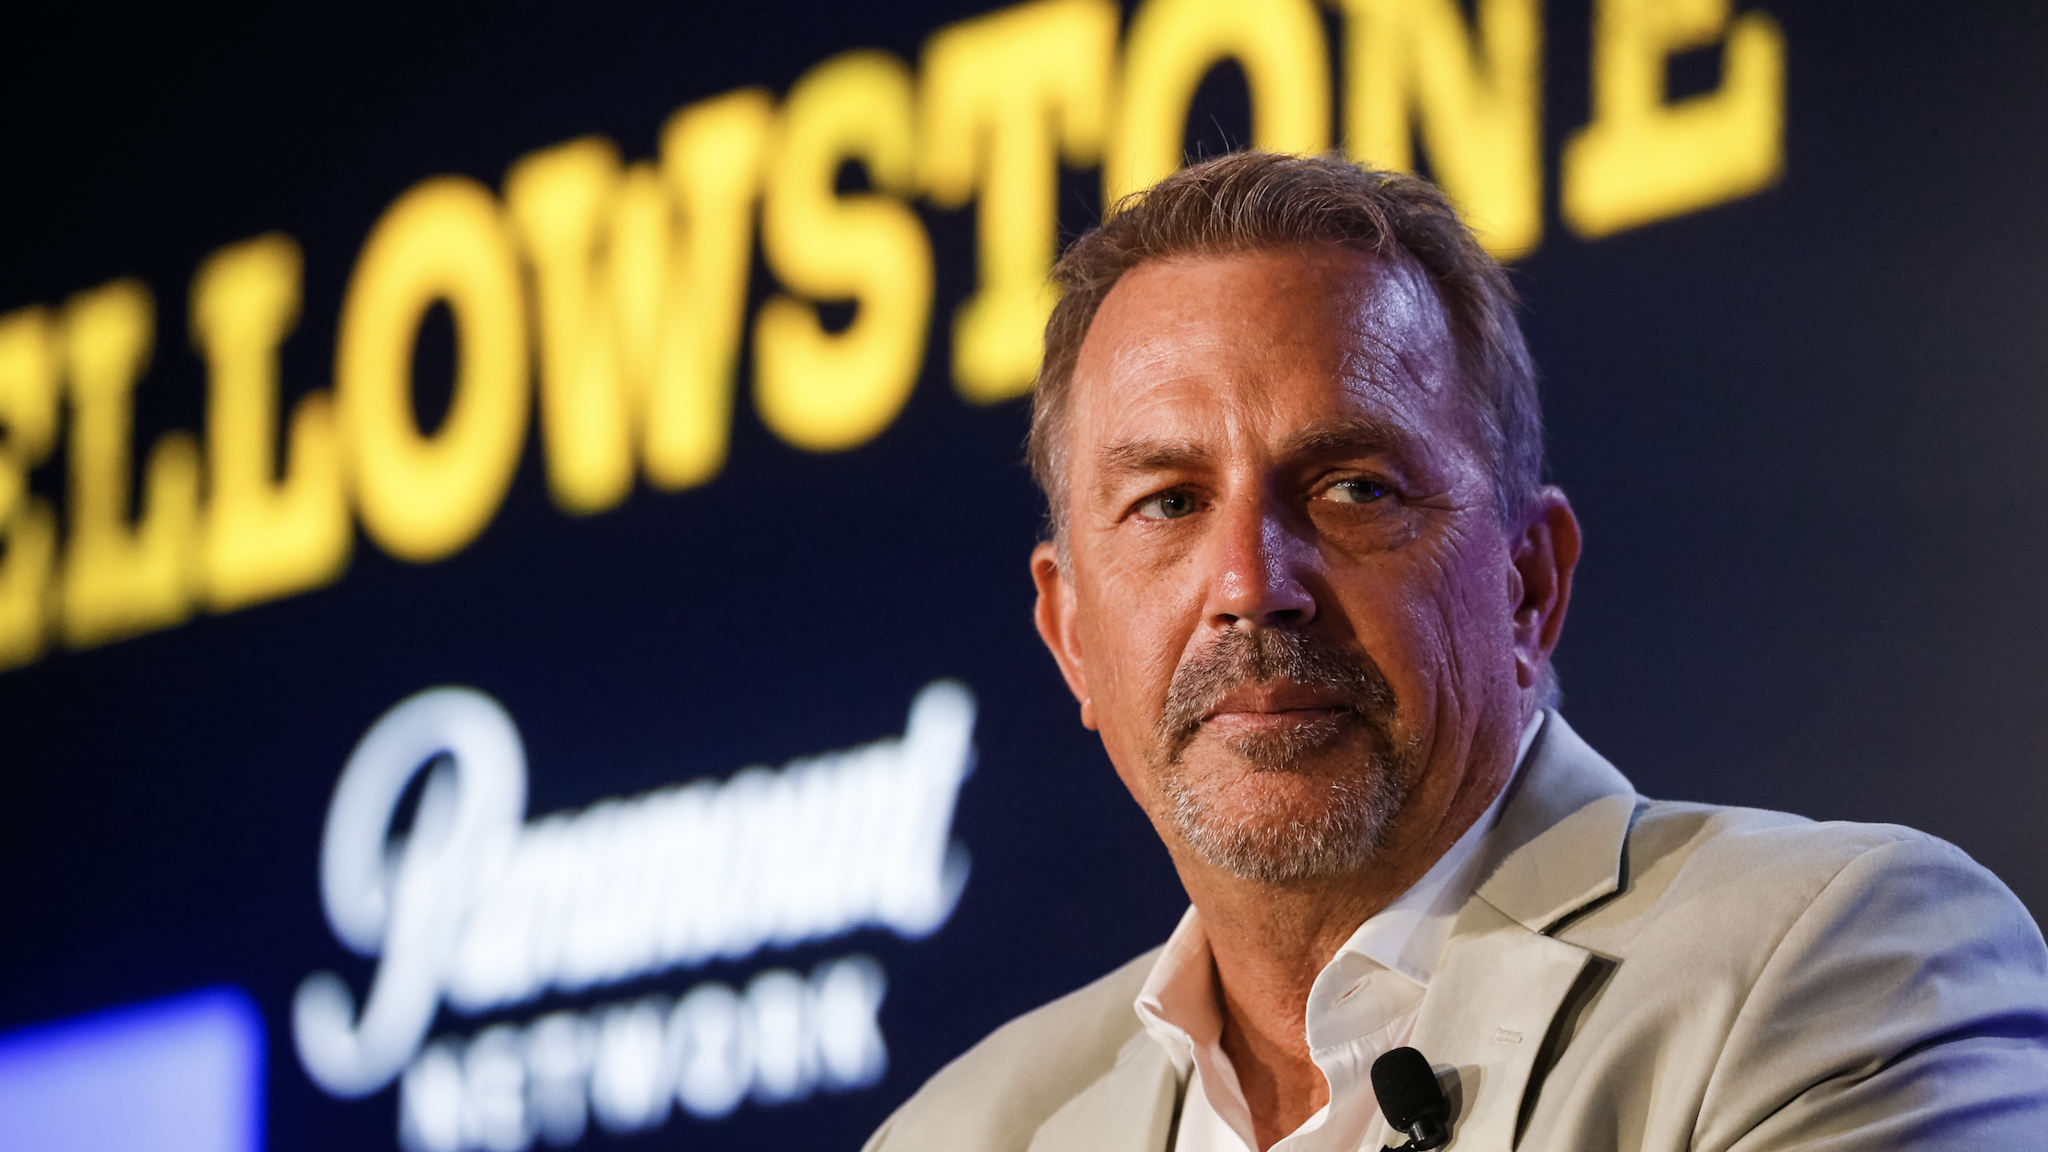 CANNES, FRANCE - JUNE 21: Kevin Costner attends 'A conversation with Kevin Costner from Paramount Network and Yellowstone' during the Cannes Lions Festival 2018 on June 21, 2018 in Cannes, France.